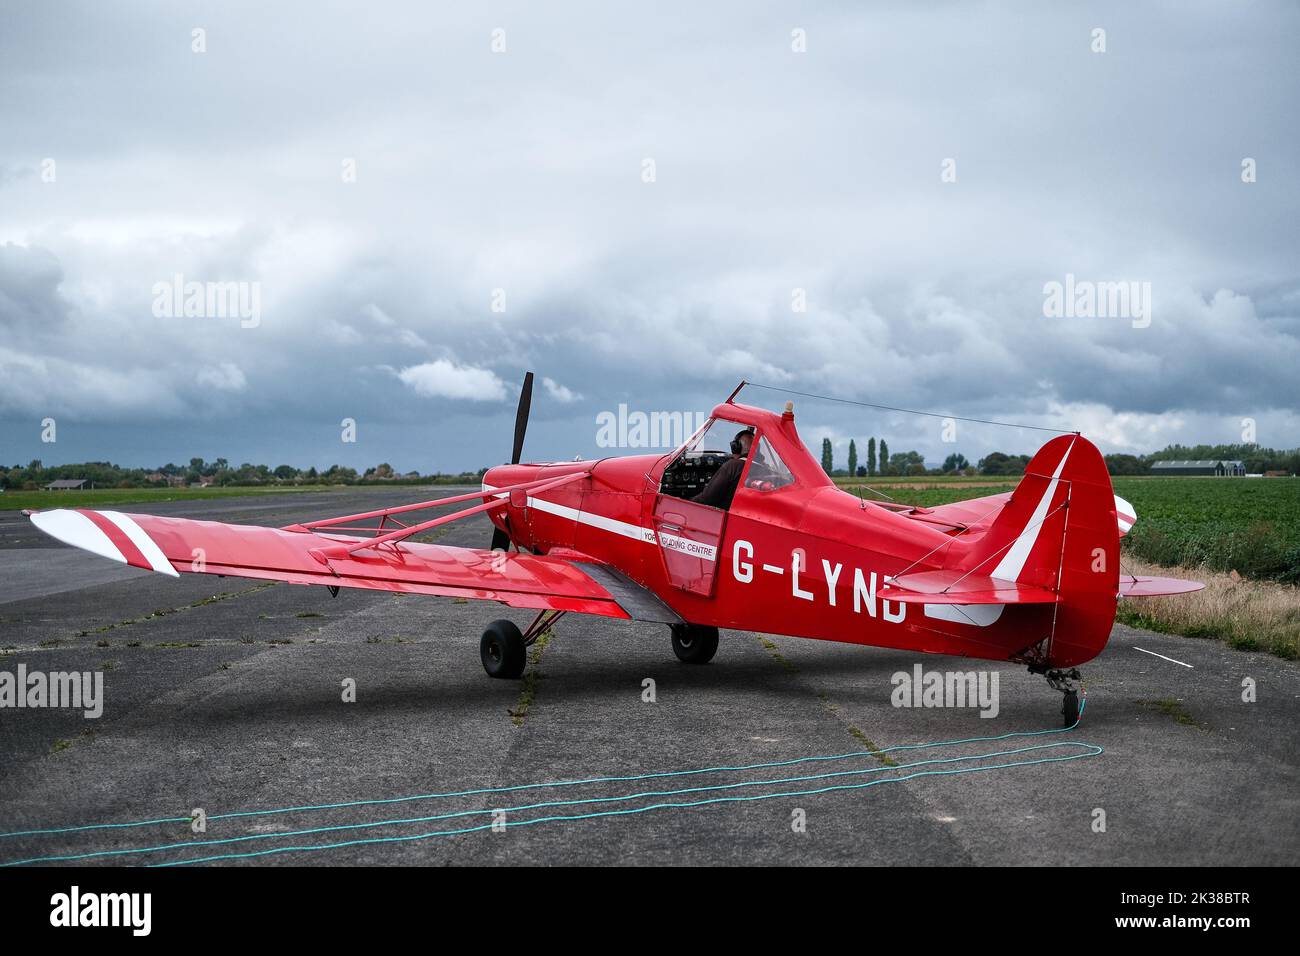 A red glider tug on the runway at Rufforth Airfield, York with a tow rope trailing behind ready to tow a glider into the air. Stock Photo